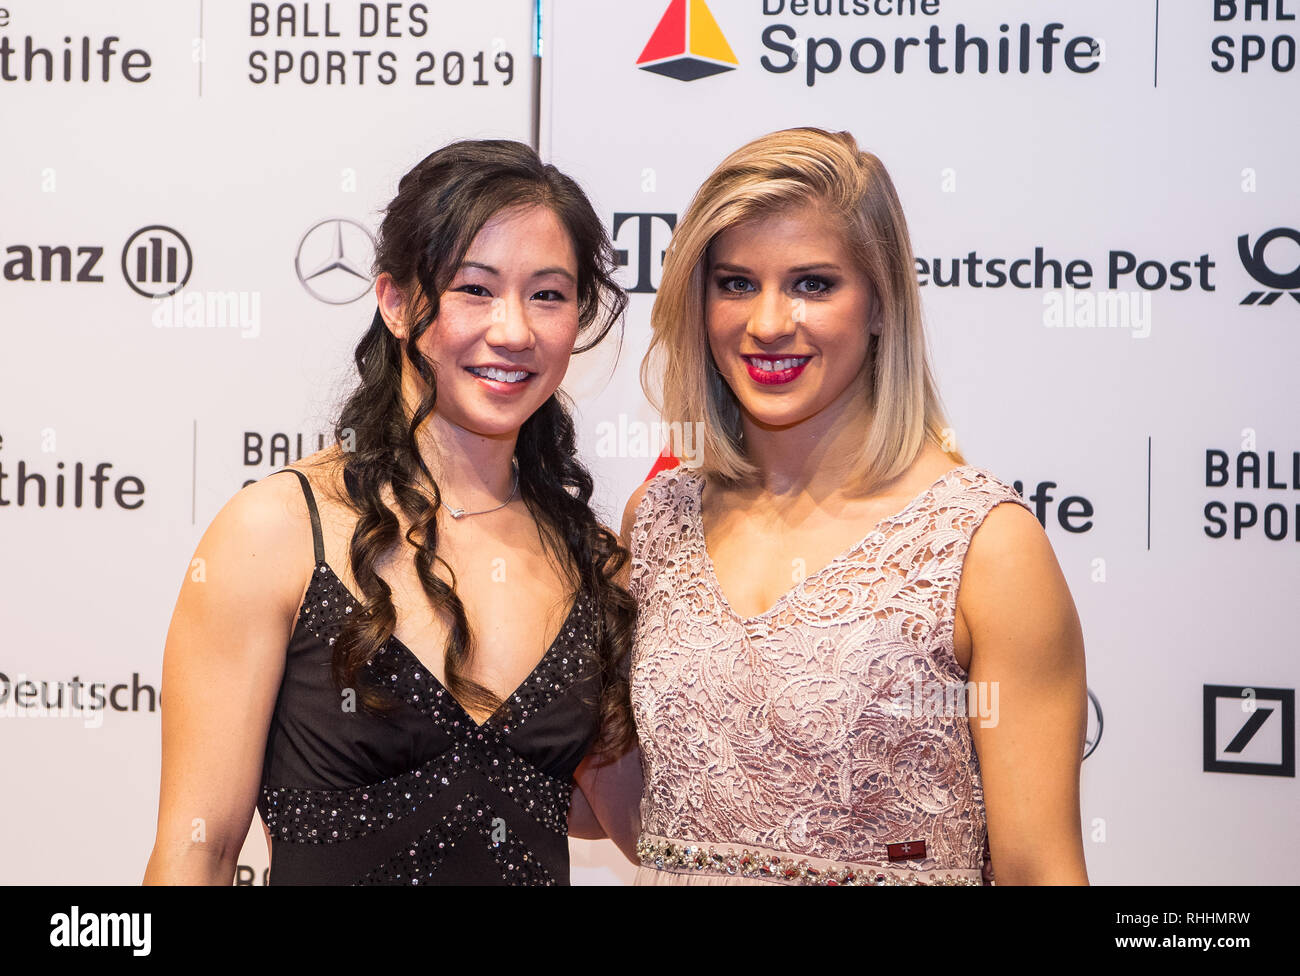 Wiesbaden, Germany. 02nd Feb, 2019. Kim Bui and Elisabeth Seitz, gymnasts,  are standing in front of the sponor wall. The 49th Ball des Sports with  1800 guests from sport, politics and economy